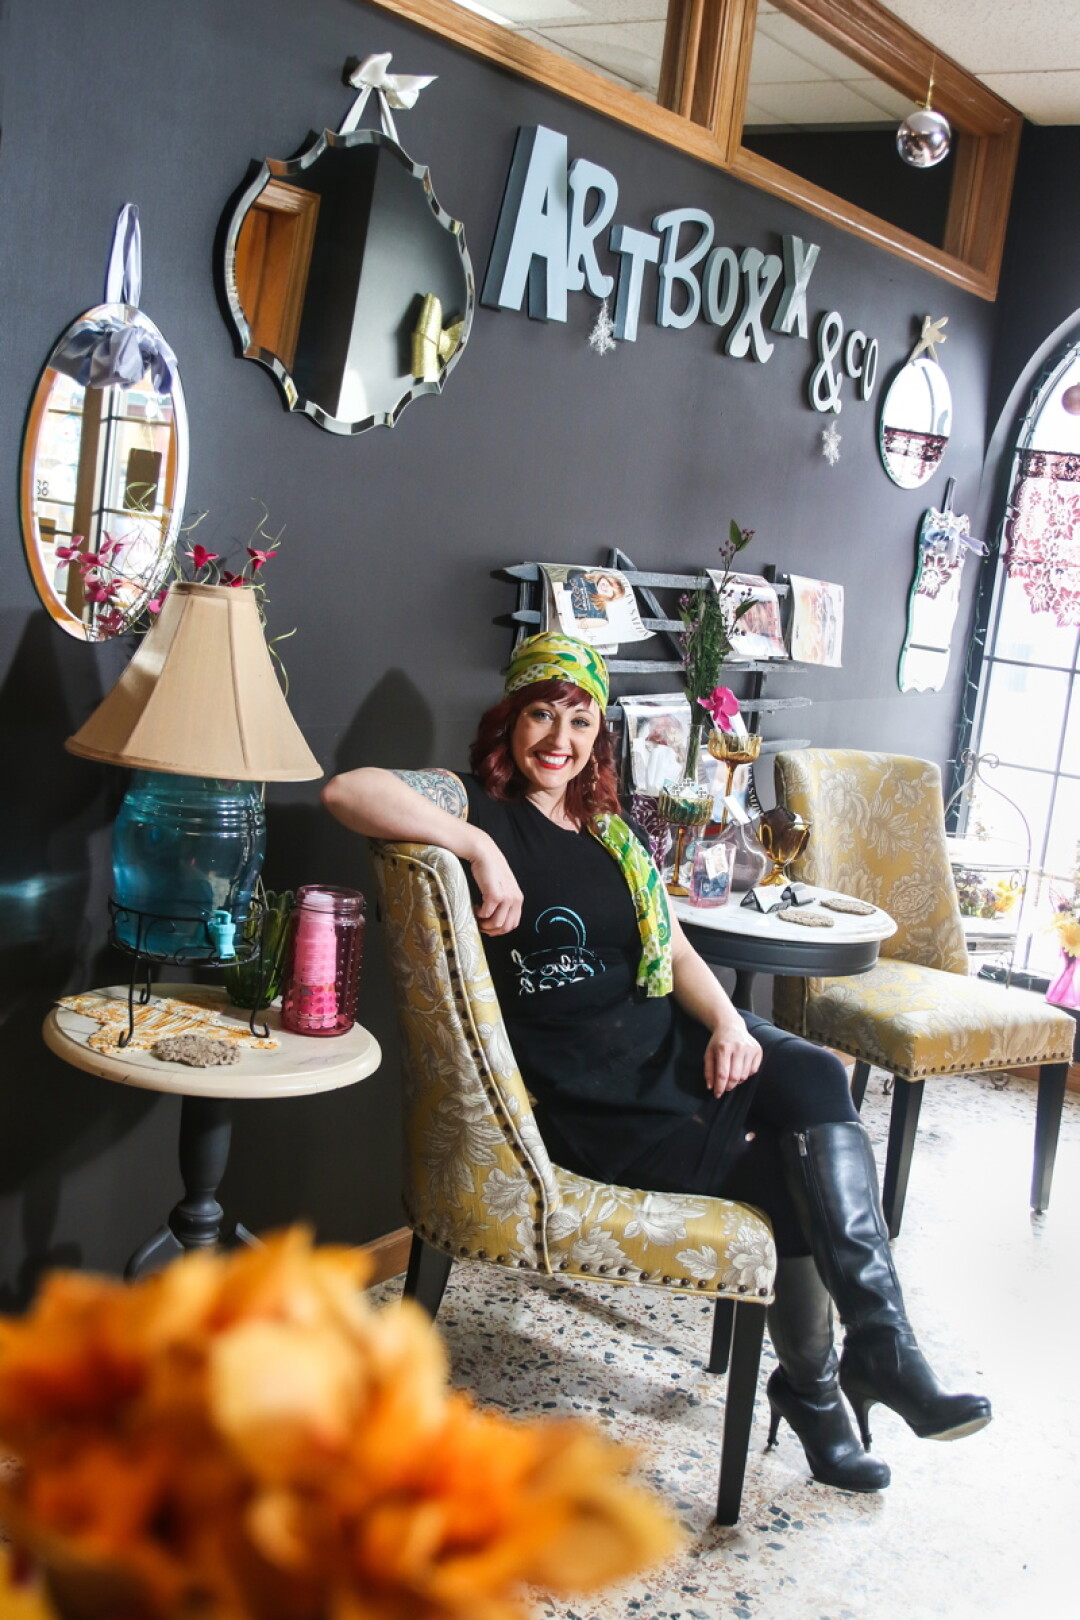 THESE BOOTS WERE MADE FOR STYLIN’. Nikki Luft owns ArtBoxx Salon &amp; Co. in downtown Eau Claire.